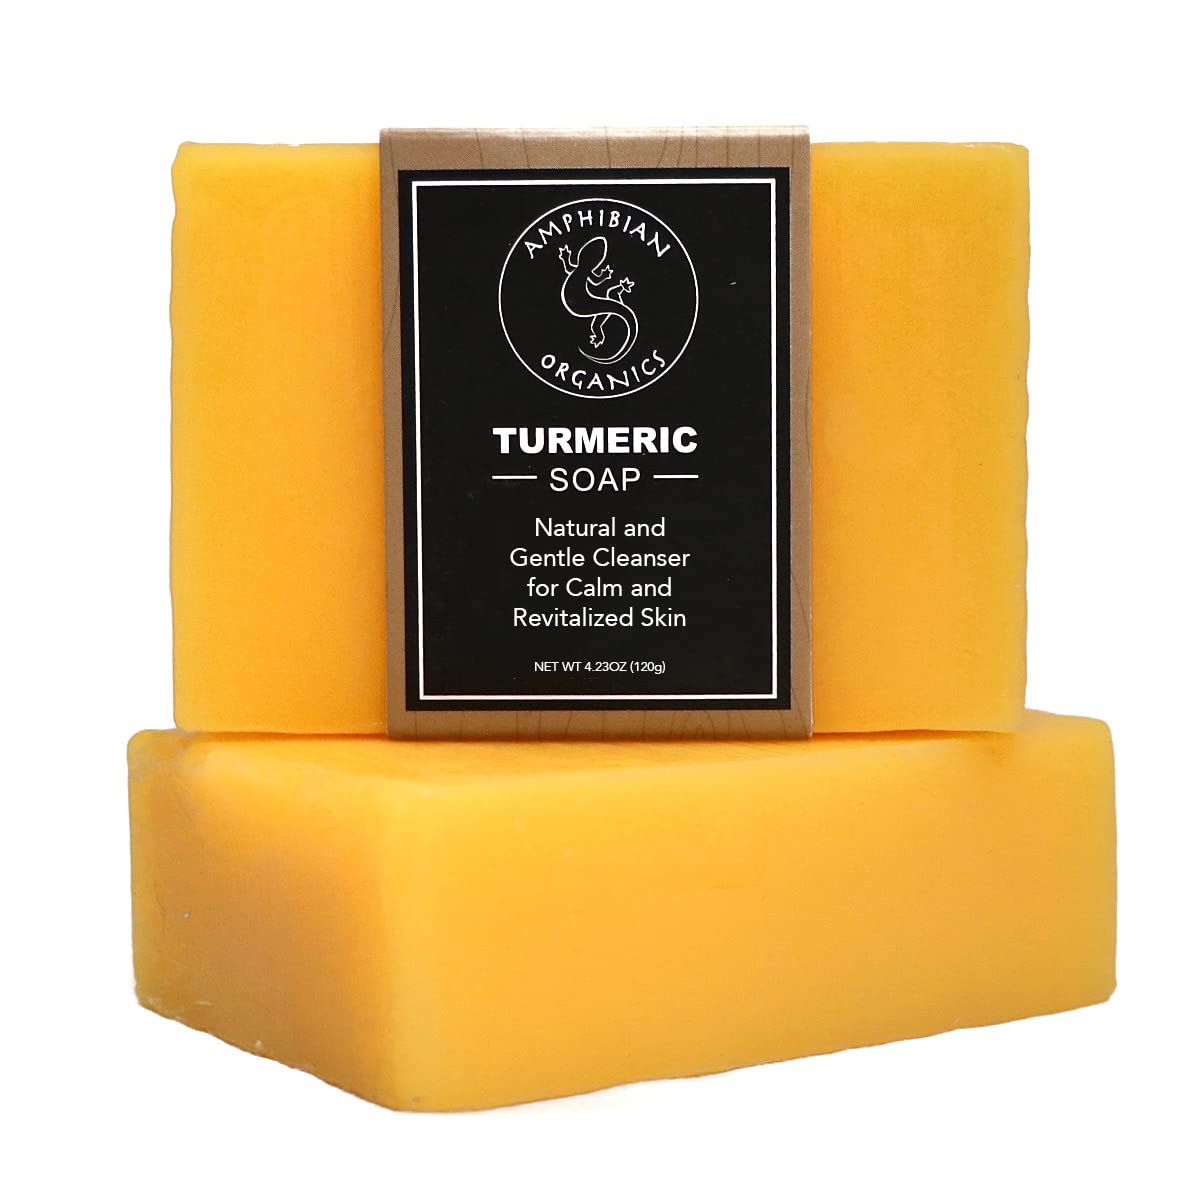 Amphibian Organics Turmeric Soap - All Natural Gentle Cleanser for All Skin Types. No Stain Face  Body Cleanser for Men, Women  Teens.